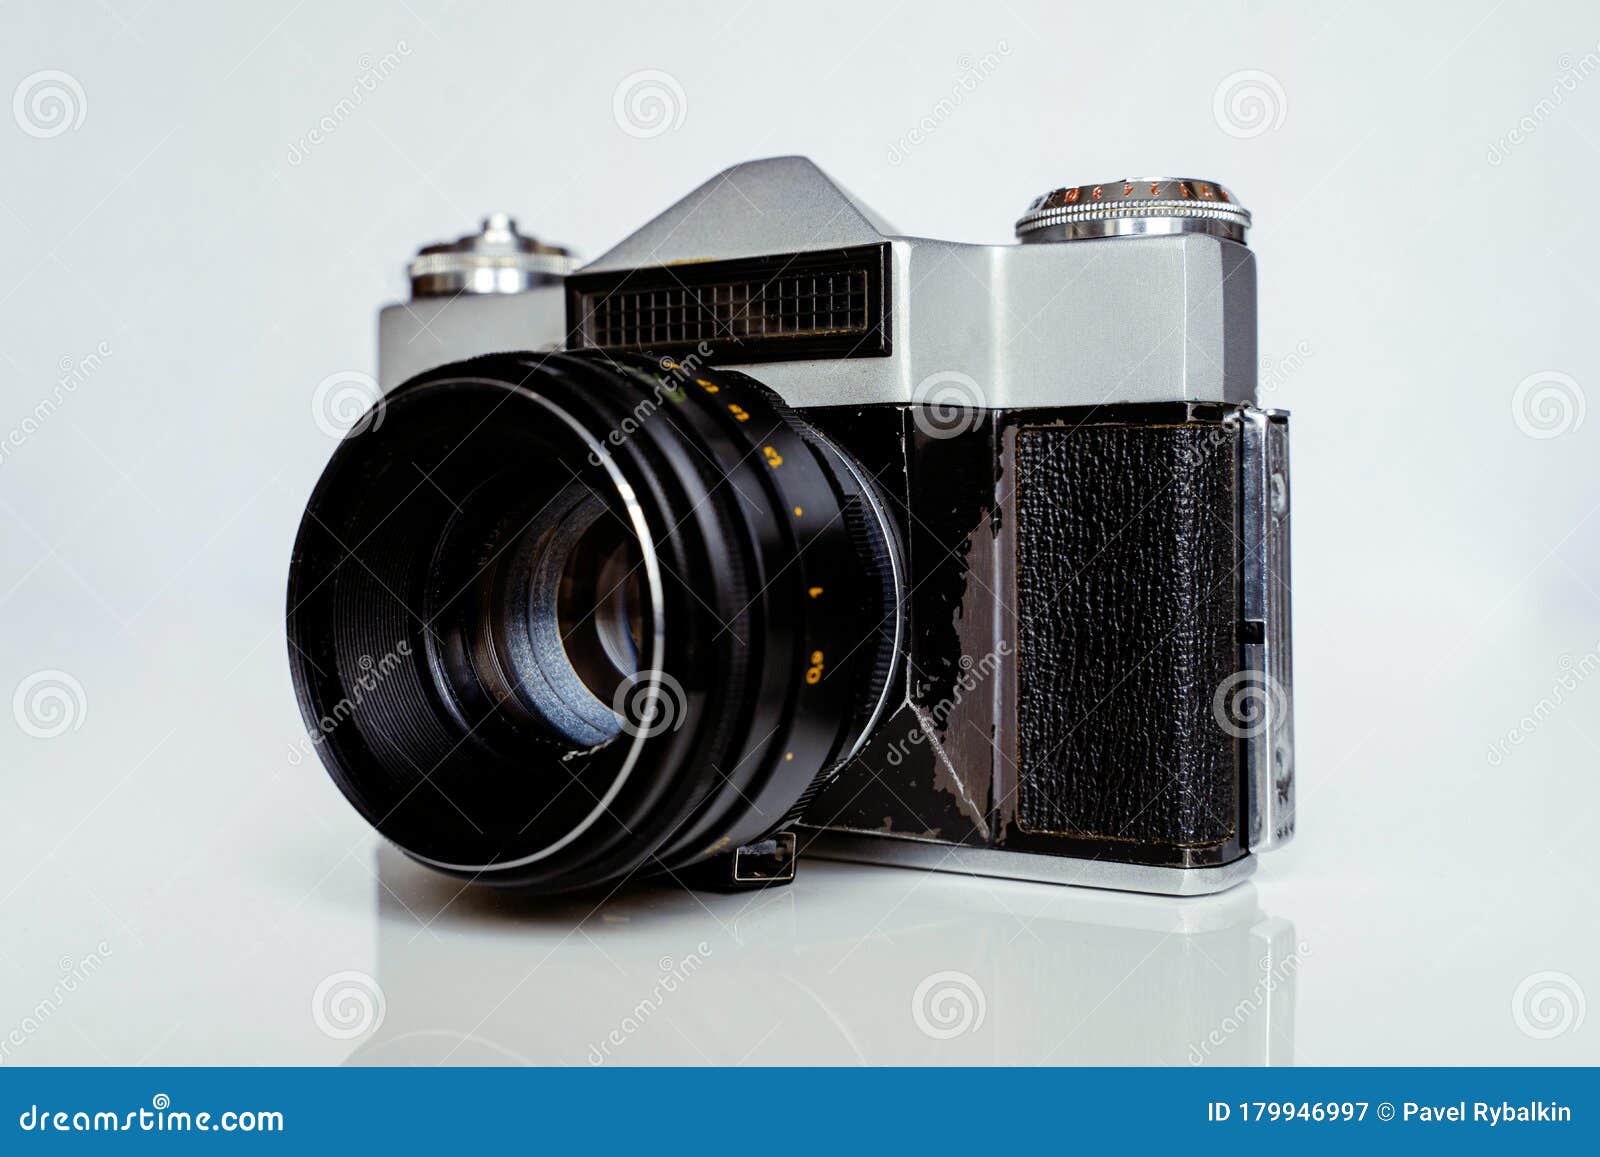 a soviet union camera zenit e produced in 60s and 80s as an analogue to the german leica. very old film camera in shabby 